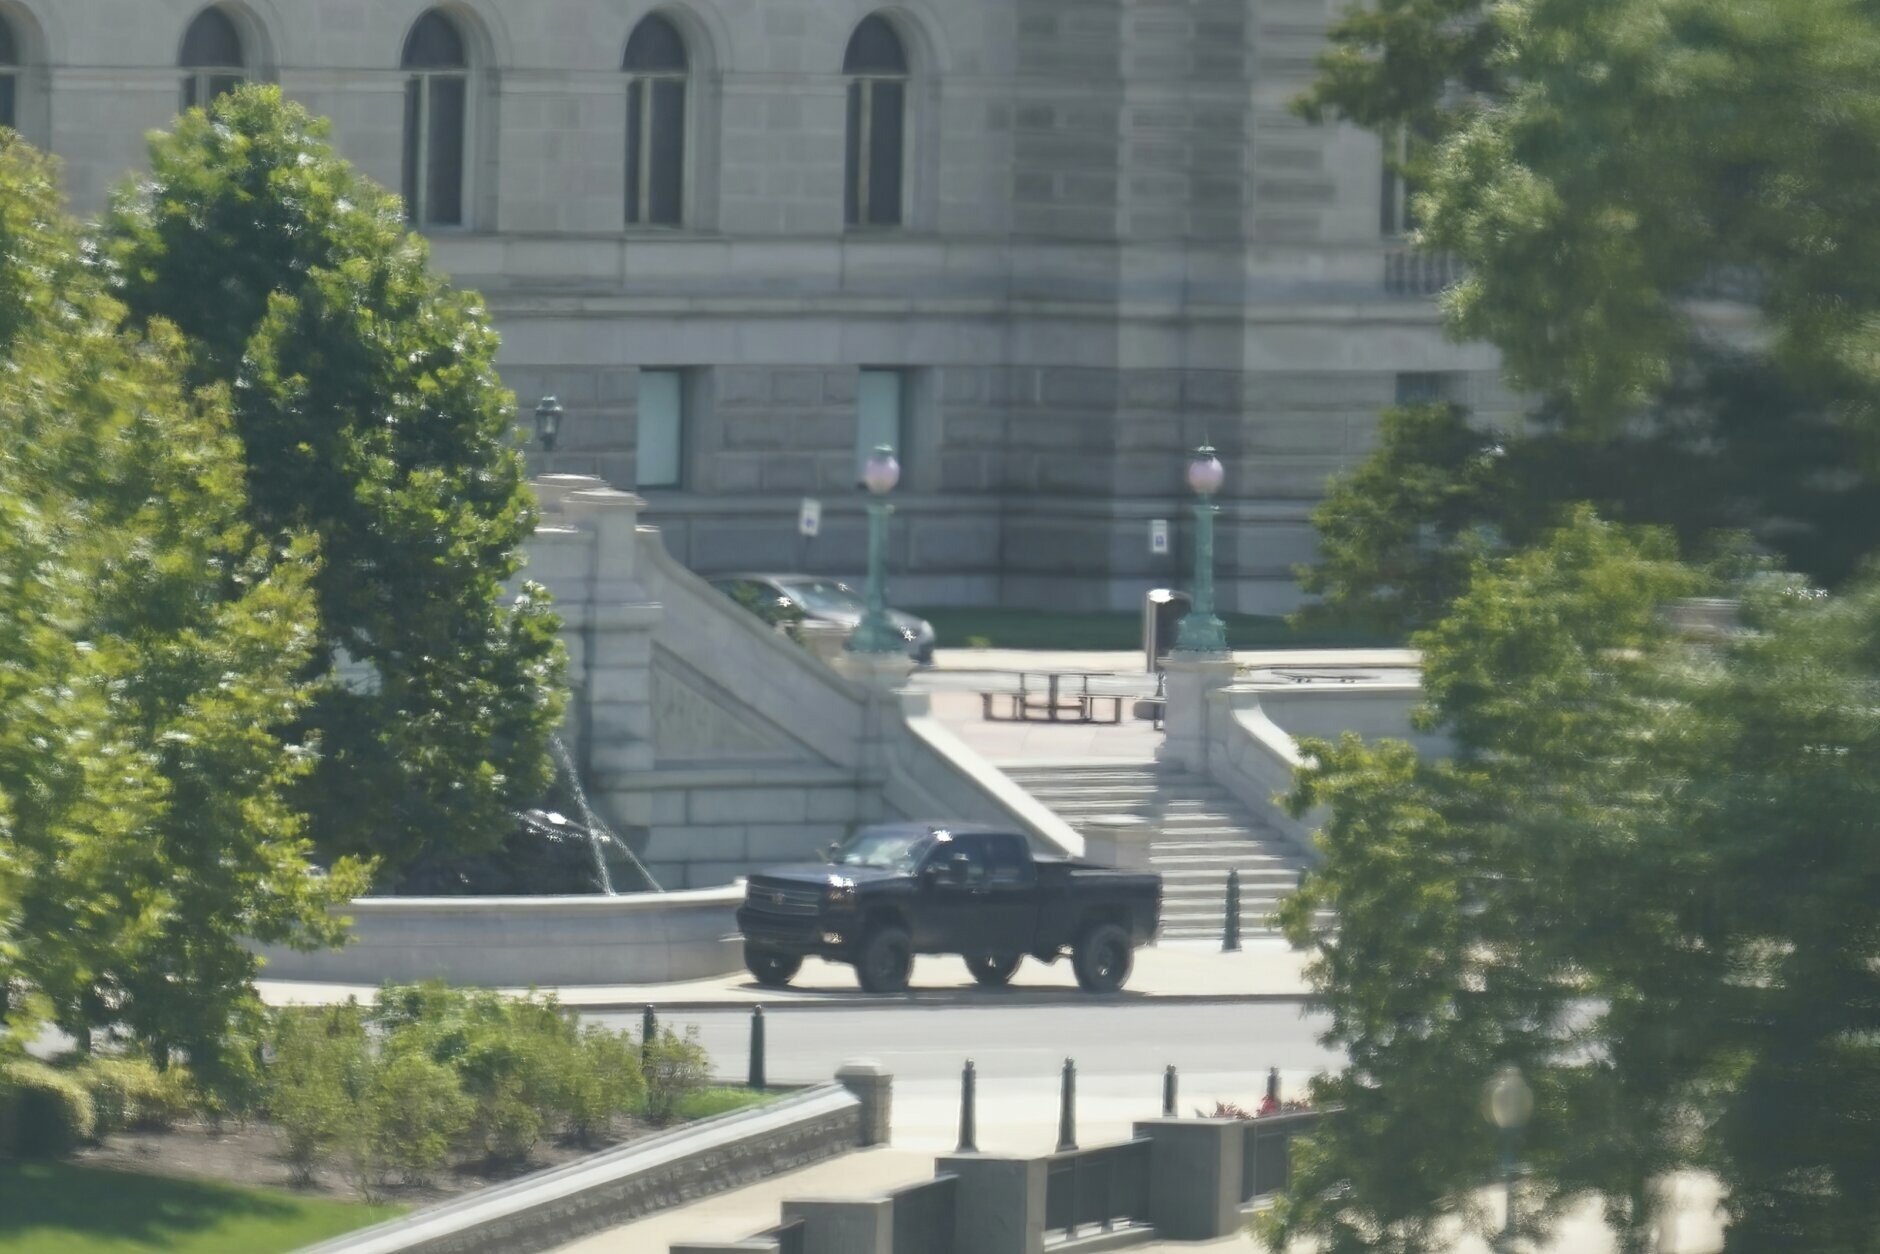 <p>A pickup truck is parked on the sidewalk in front of the Library of Congress&#8217; Thomas Jefferson Building, as seen from a window of the U.S. Capitol, Thursday, Aug. 19, 2021, in Washington. A man sitting in the pickup truck outside the Library of Congress has told police that he has a bomb, and that&#8217;s led to a massive law enforcement response to determine whether it&#8217;s an operable explosive device.</p>
